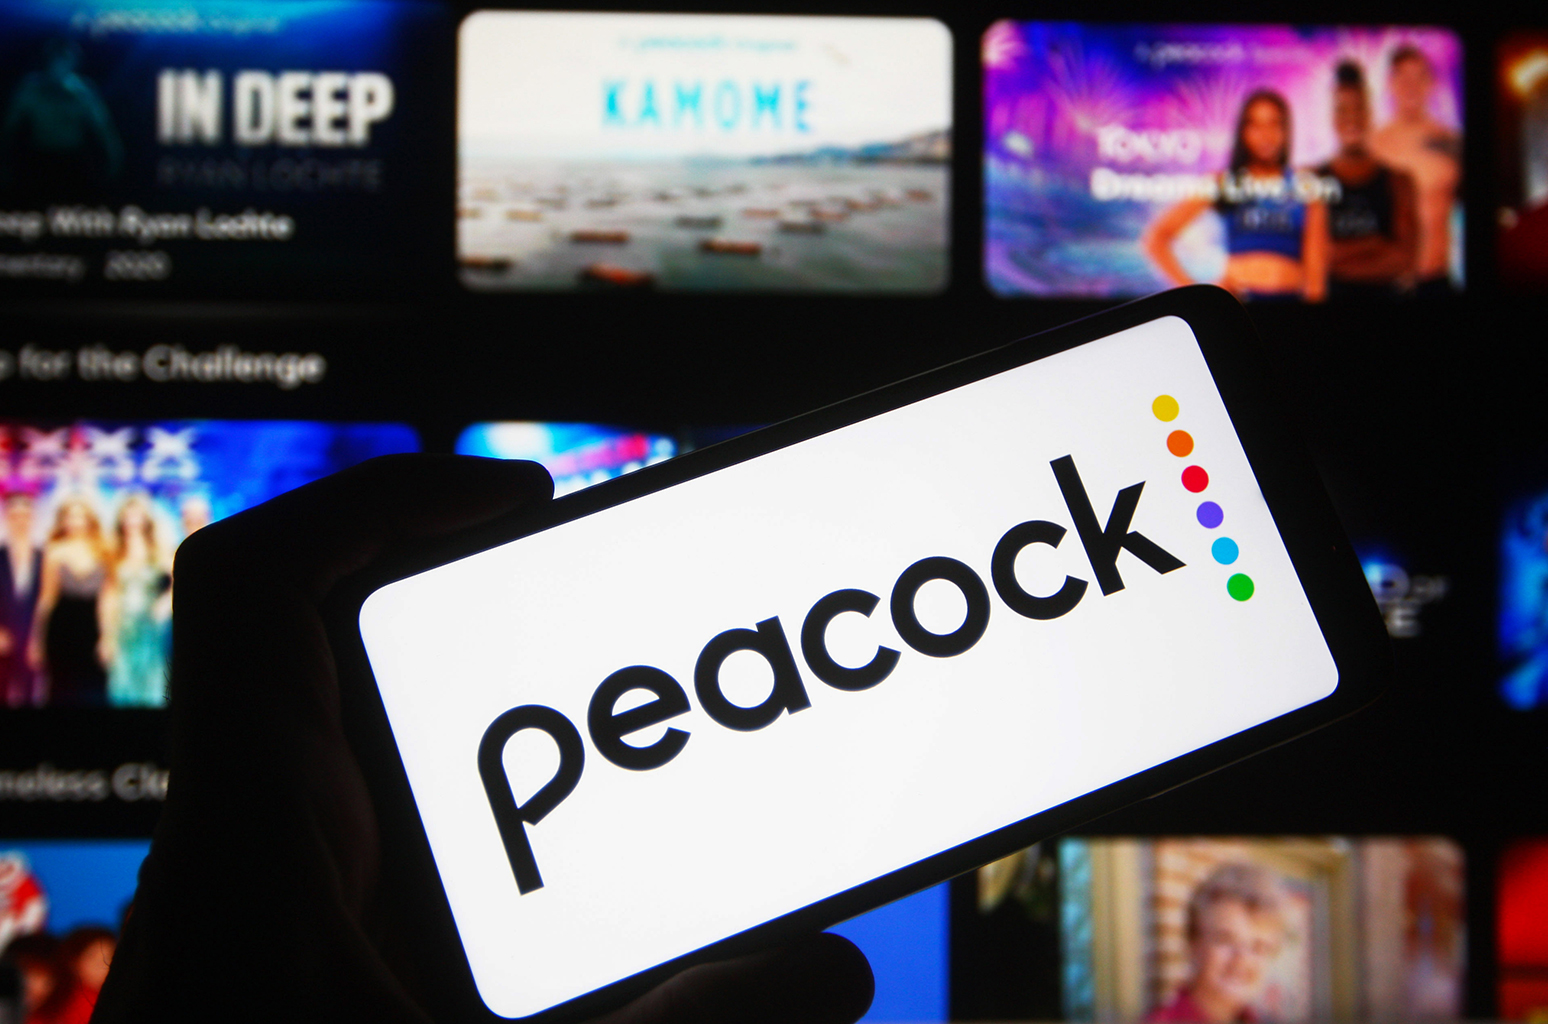 Black Friday Deal You Can Get Peacock for Just 1.99 a Month for 12 Months